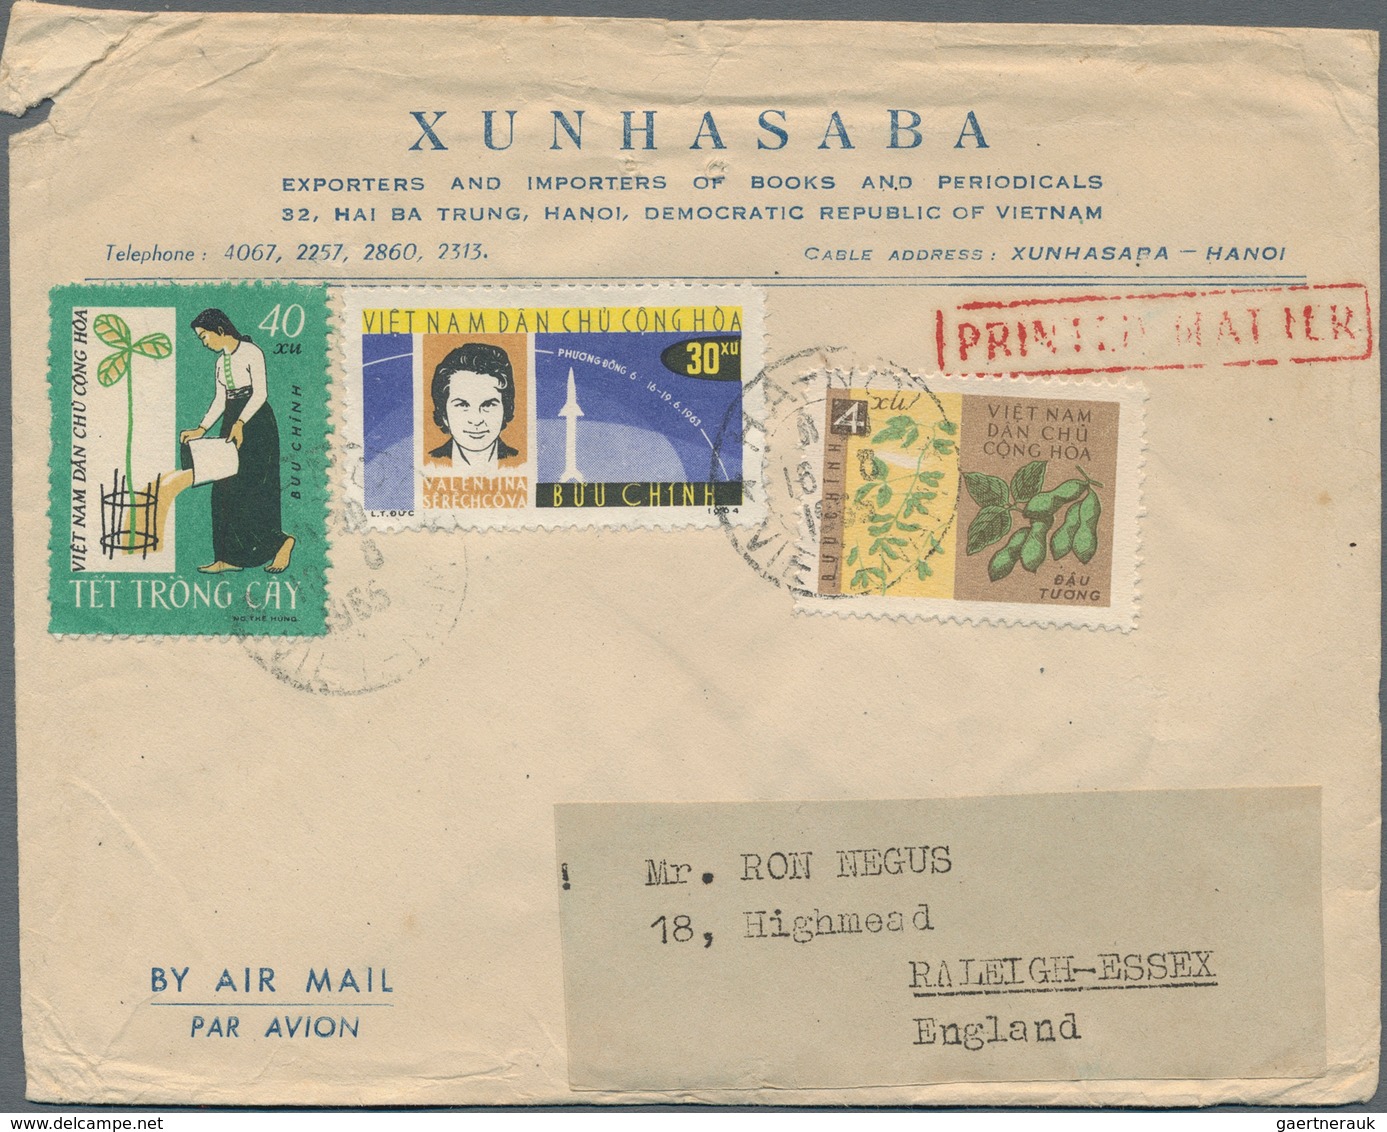 Vietnam-Nord (1945-1975): 1968 (ca.): Mixed Frankings: a) Xunhasaba letter from 1968 and franked wit